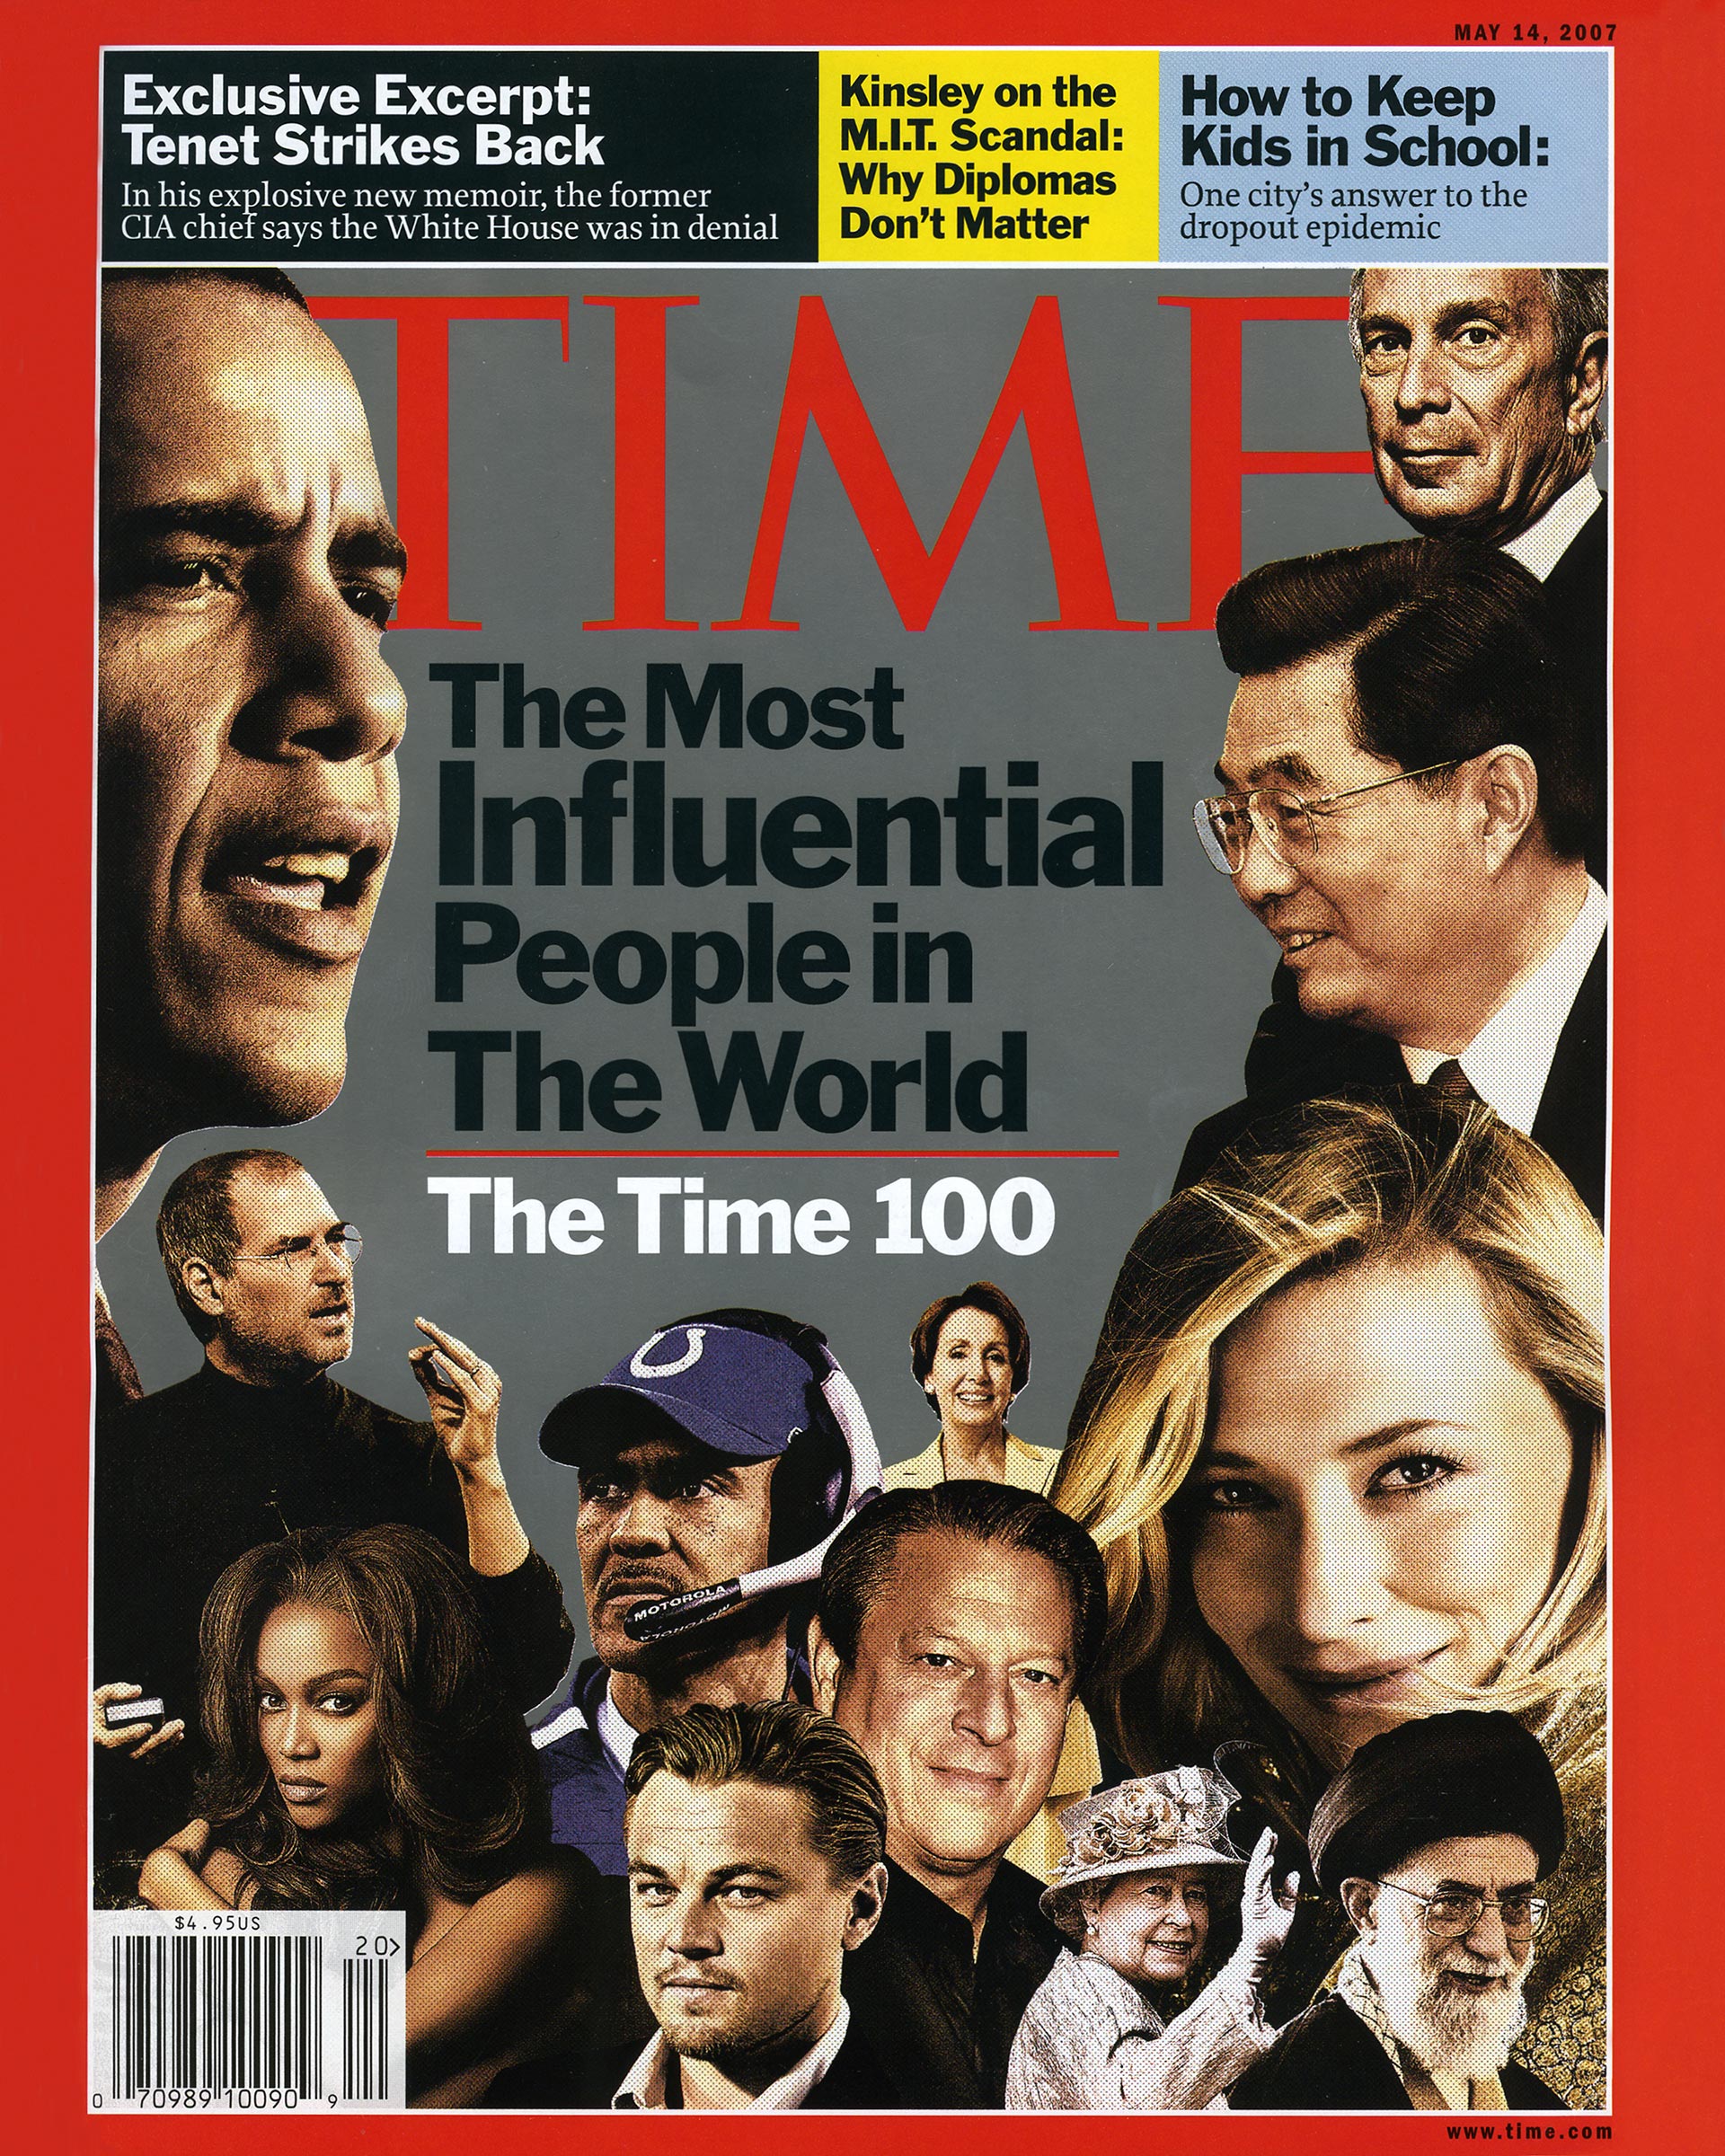 The Queen appears (near the bottom right) as a member of the TIME 100 on the May 14, 2007, cover of TIME